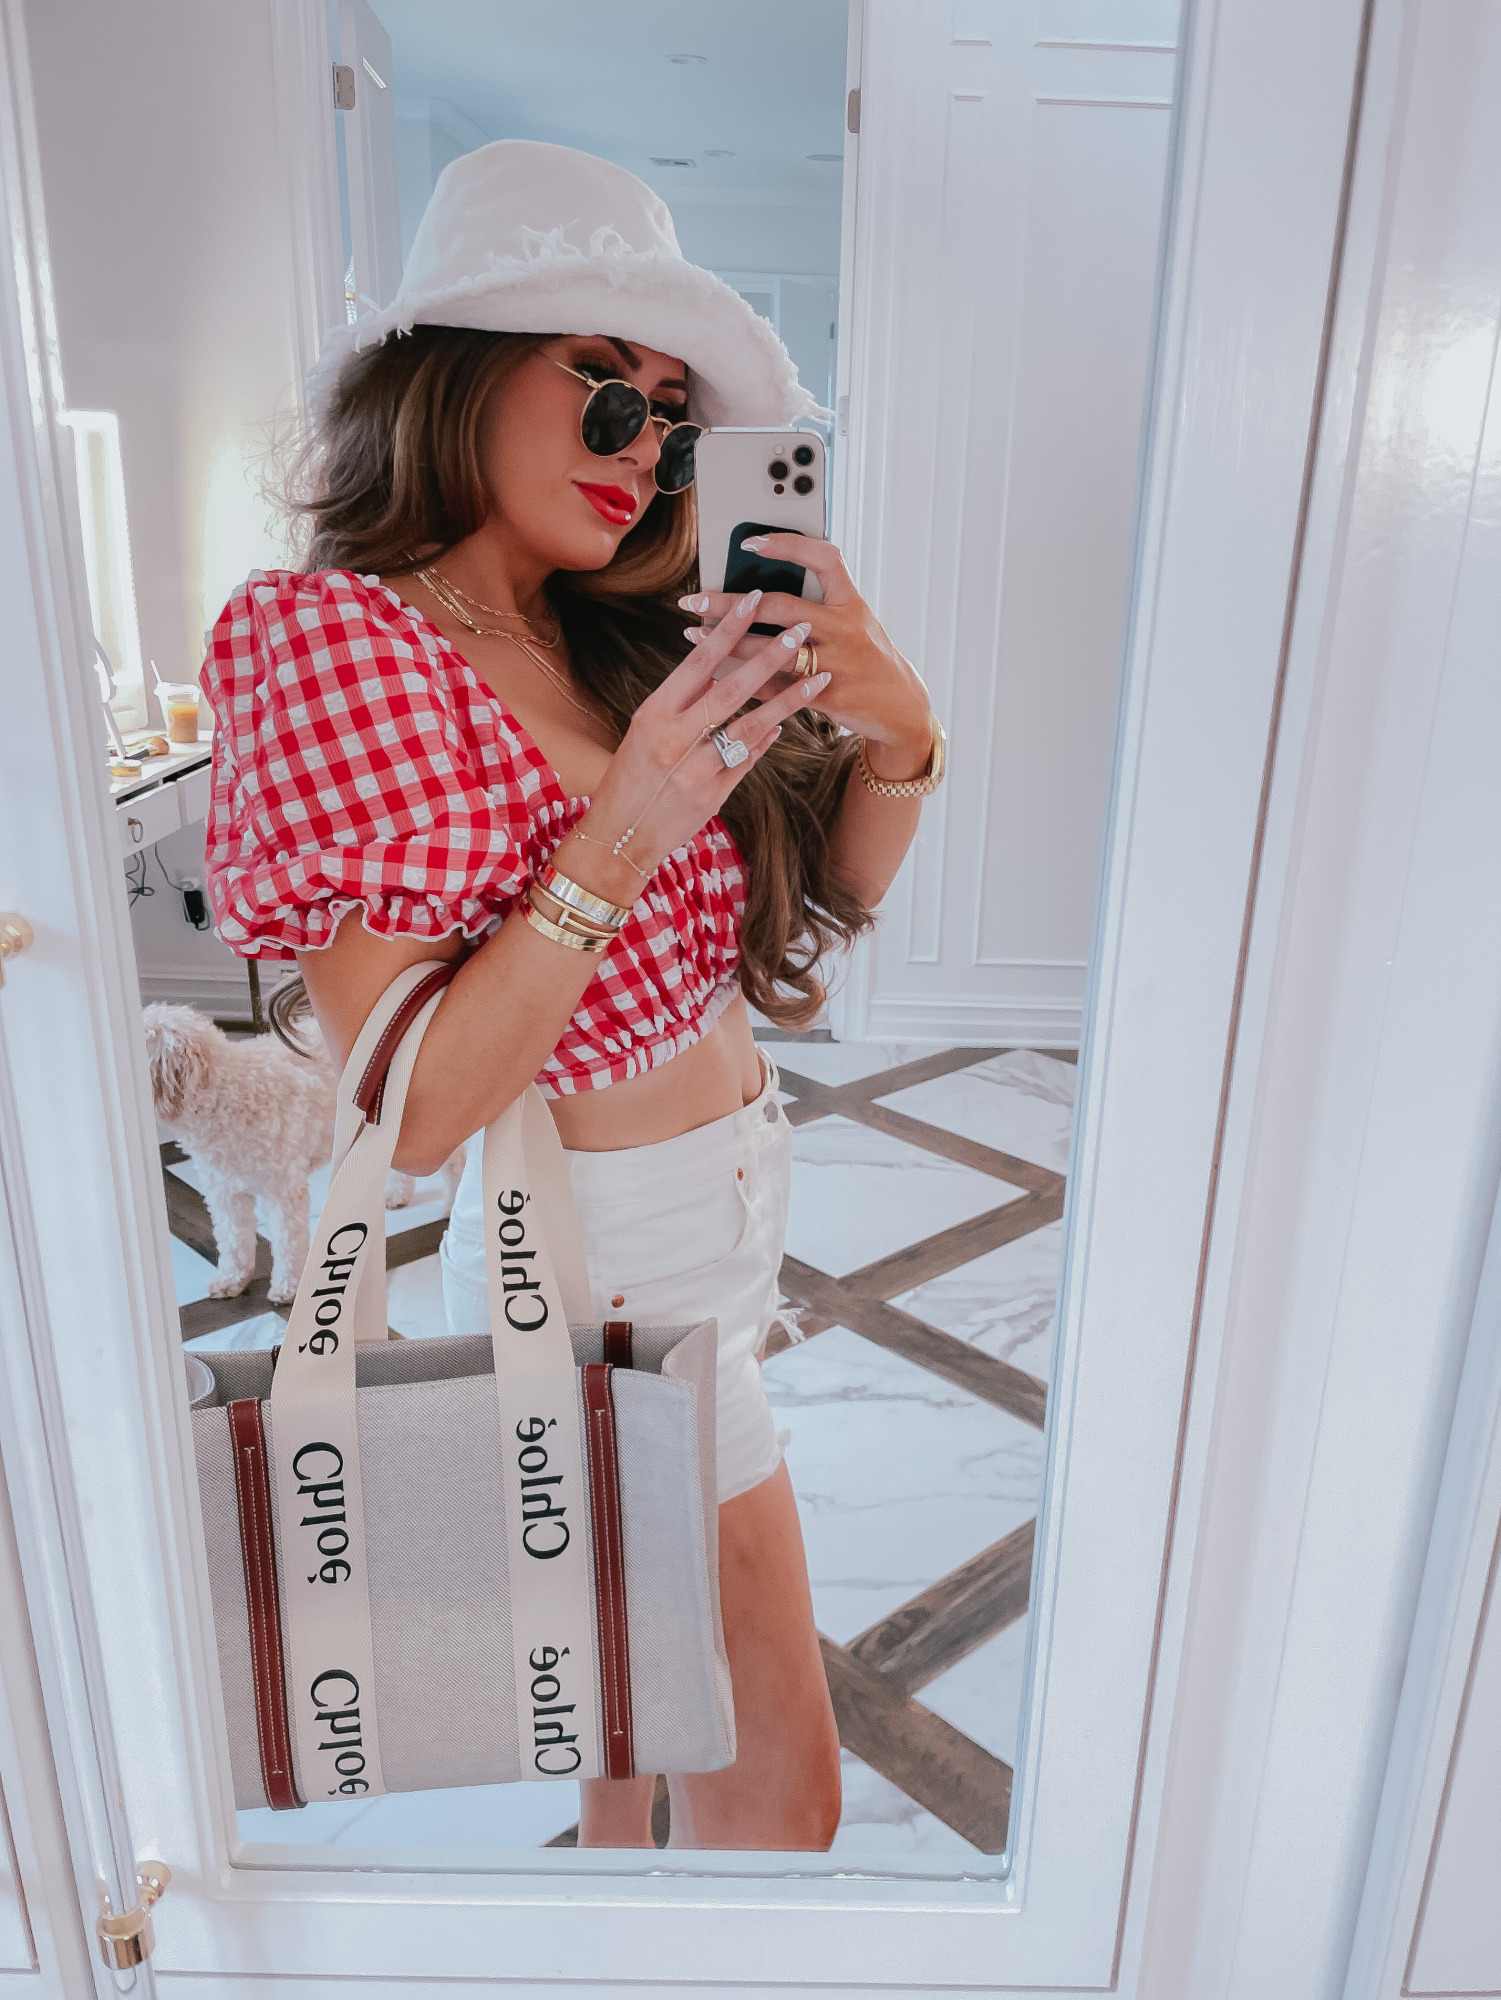 july 4 outfit inspiration 2021, pinterest july 4 outfit, bucket hat, gucci red lipstick, chloe tote bag, Emily gemma1 | June Instagram Recap by popular US fashion blog, The Sweetest Thing: image of Emily Gemma wearing a a white bucket hat, red and white gingham top, white shorts, sunglasses and holding a Chloe bag. 